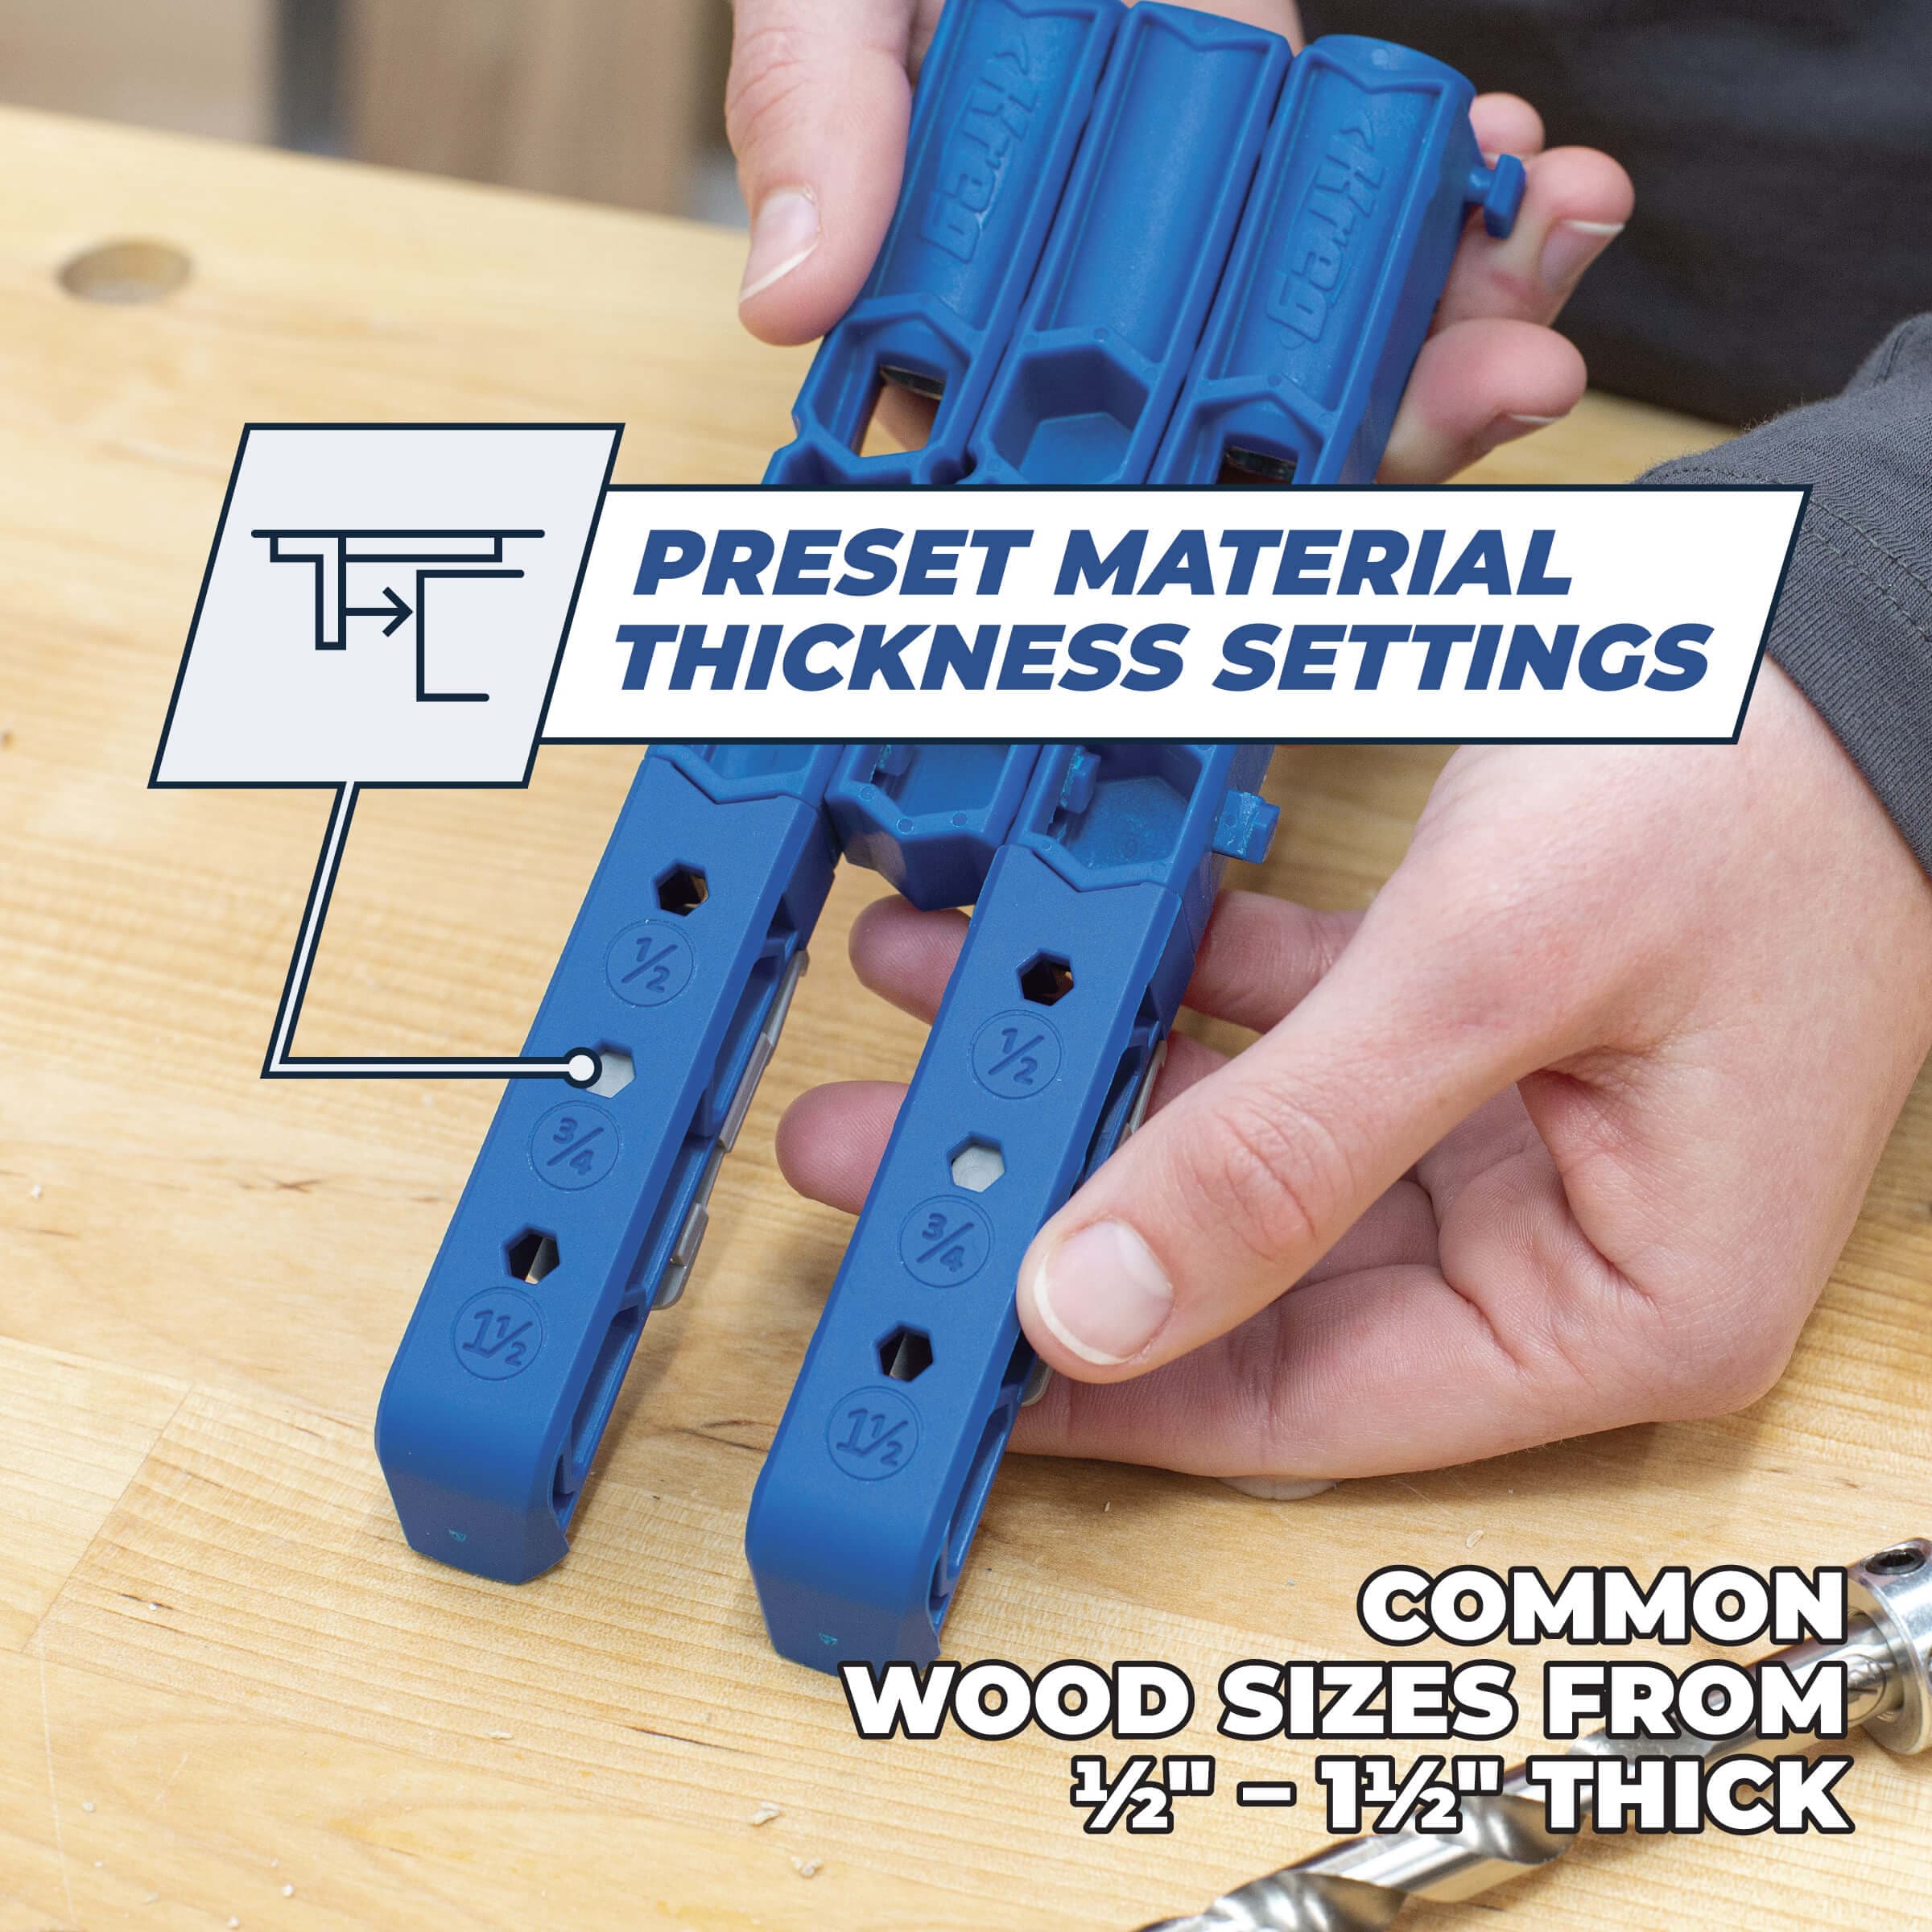 Kreg Pocket Hole Jig Kit - Portable Woodworking Jig for Strong and Easy  Pocket Hole Joints - Includes Material-Thickness Stops - 6 Piece Set